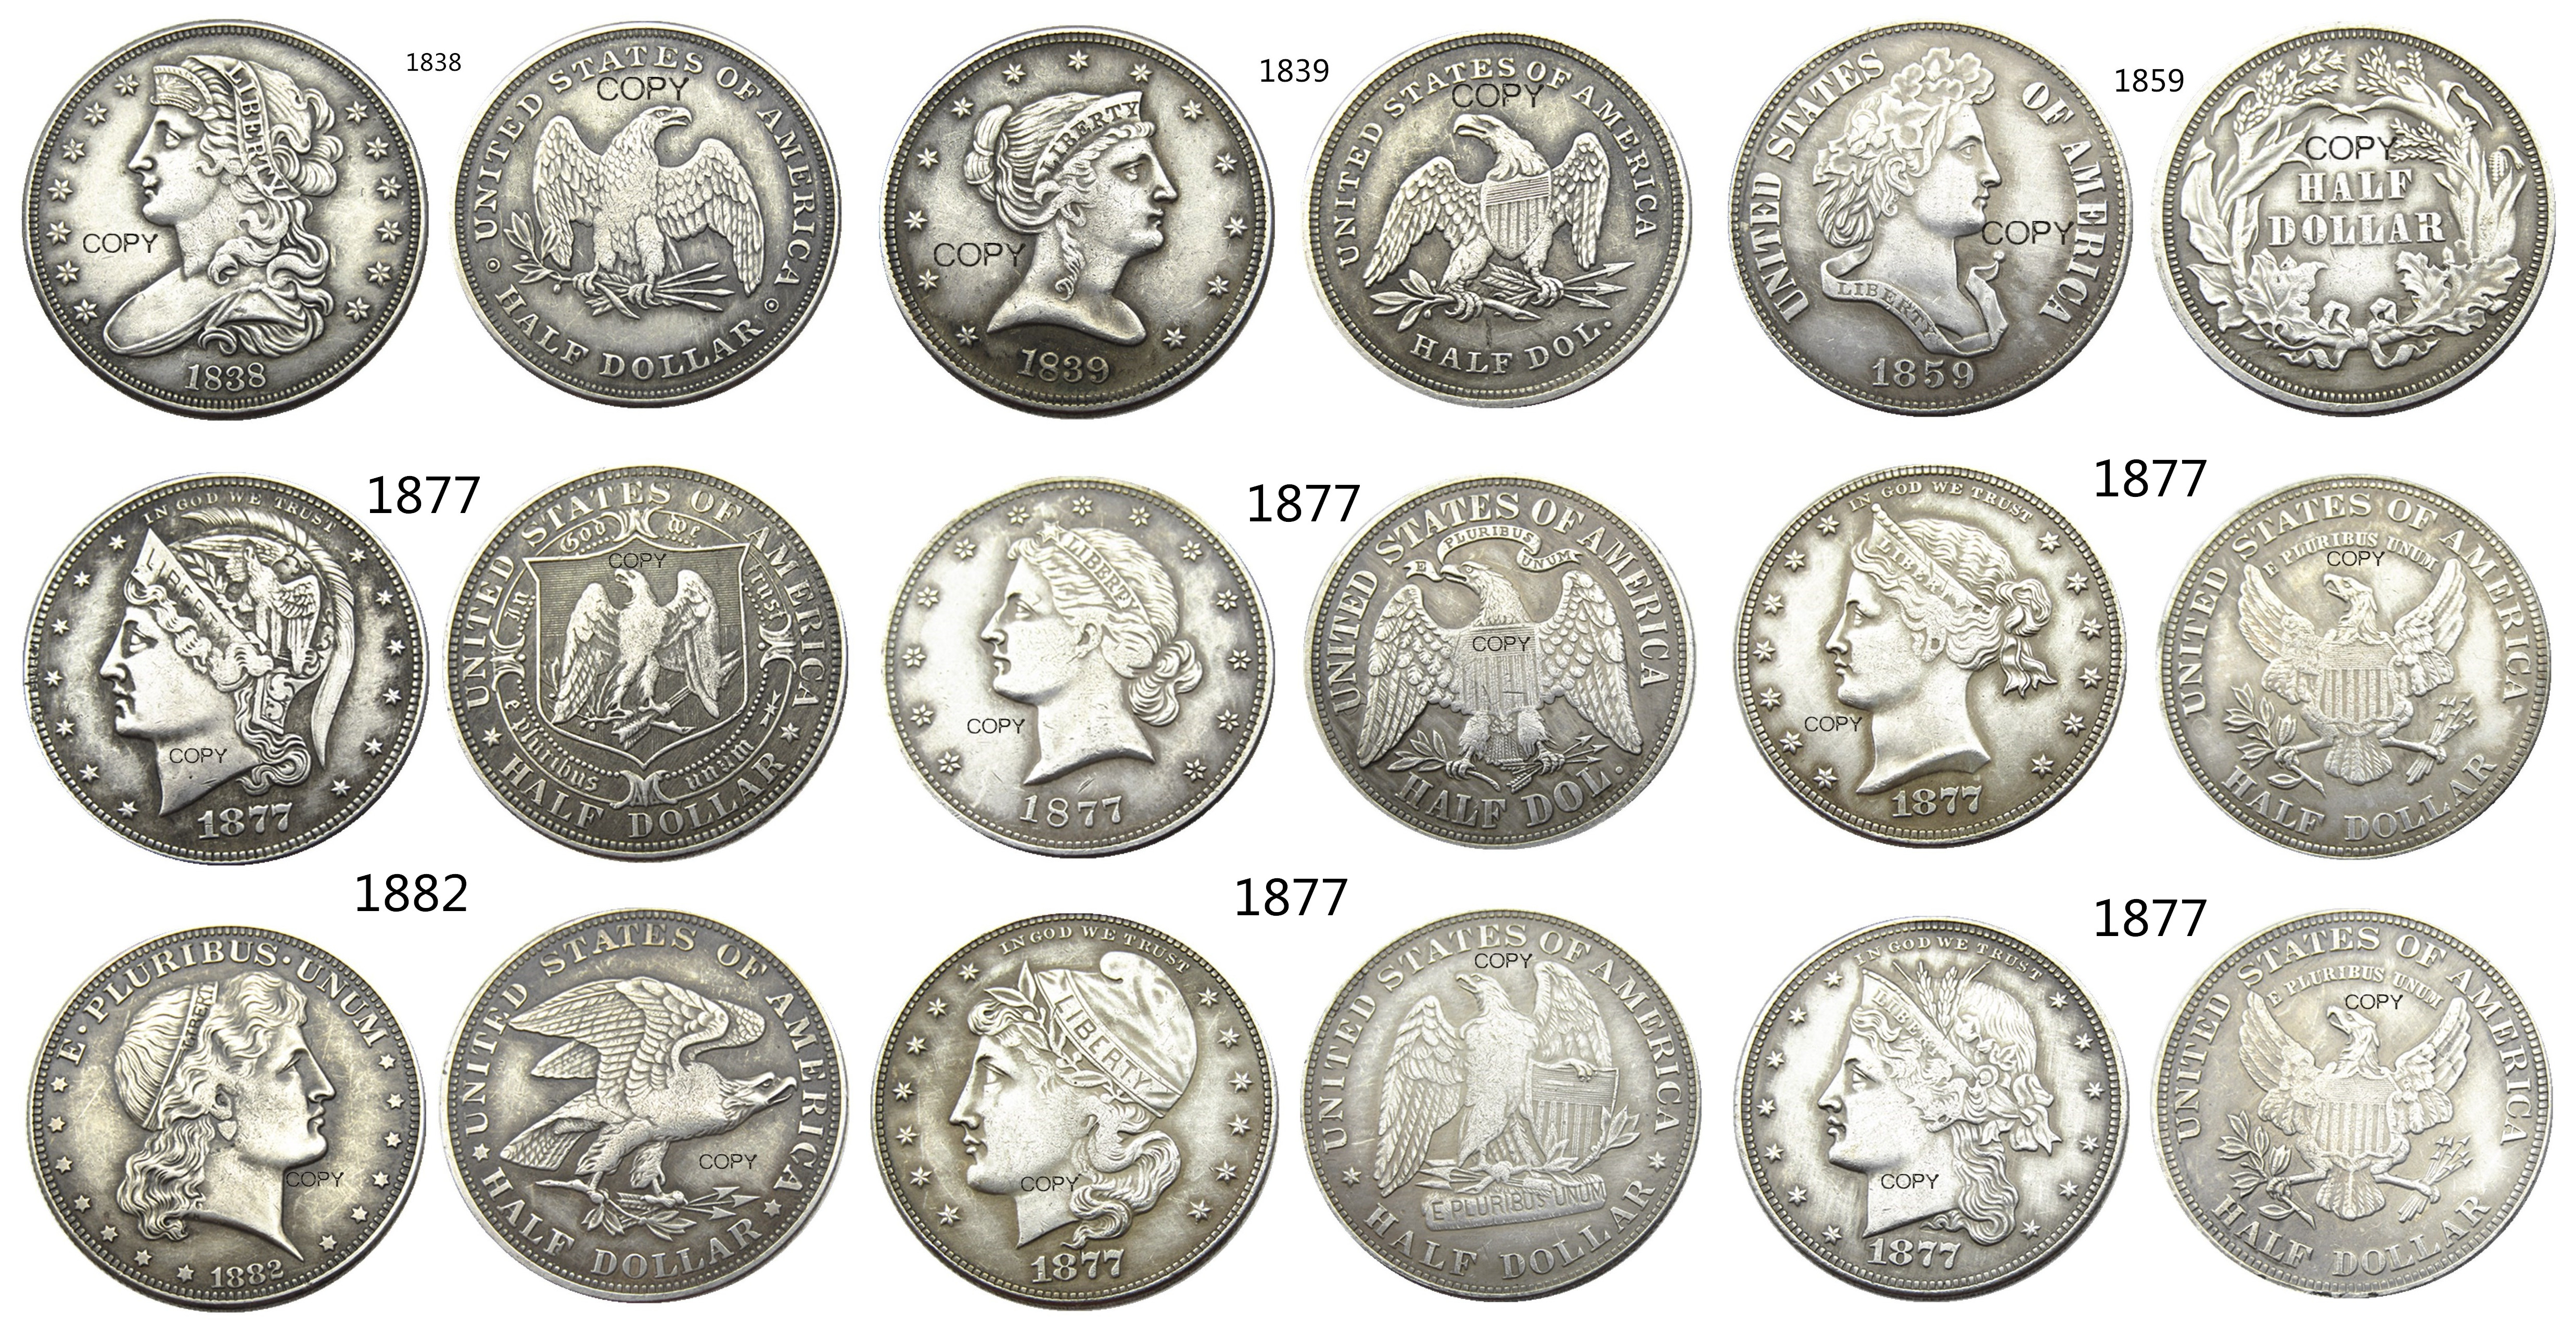 

USA A Set Of(1838-1882) 9pcs Different Head Half Dollar Patterns Craft Silver Plated Copy Coin Ornaments replica coins home decoration accessories